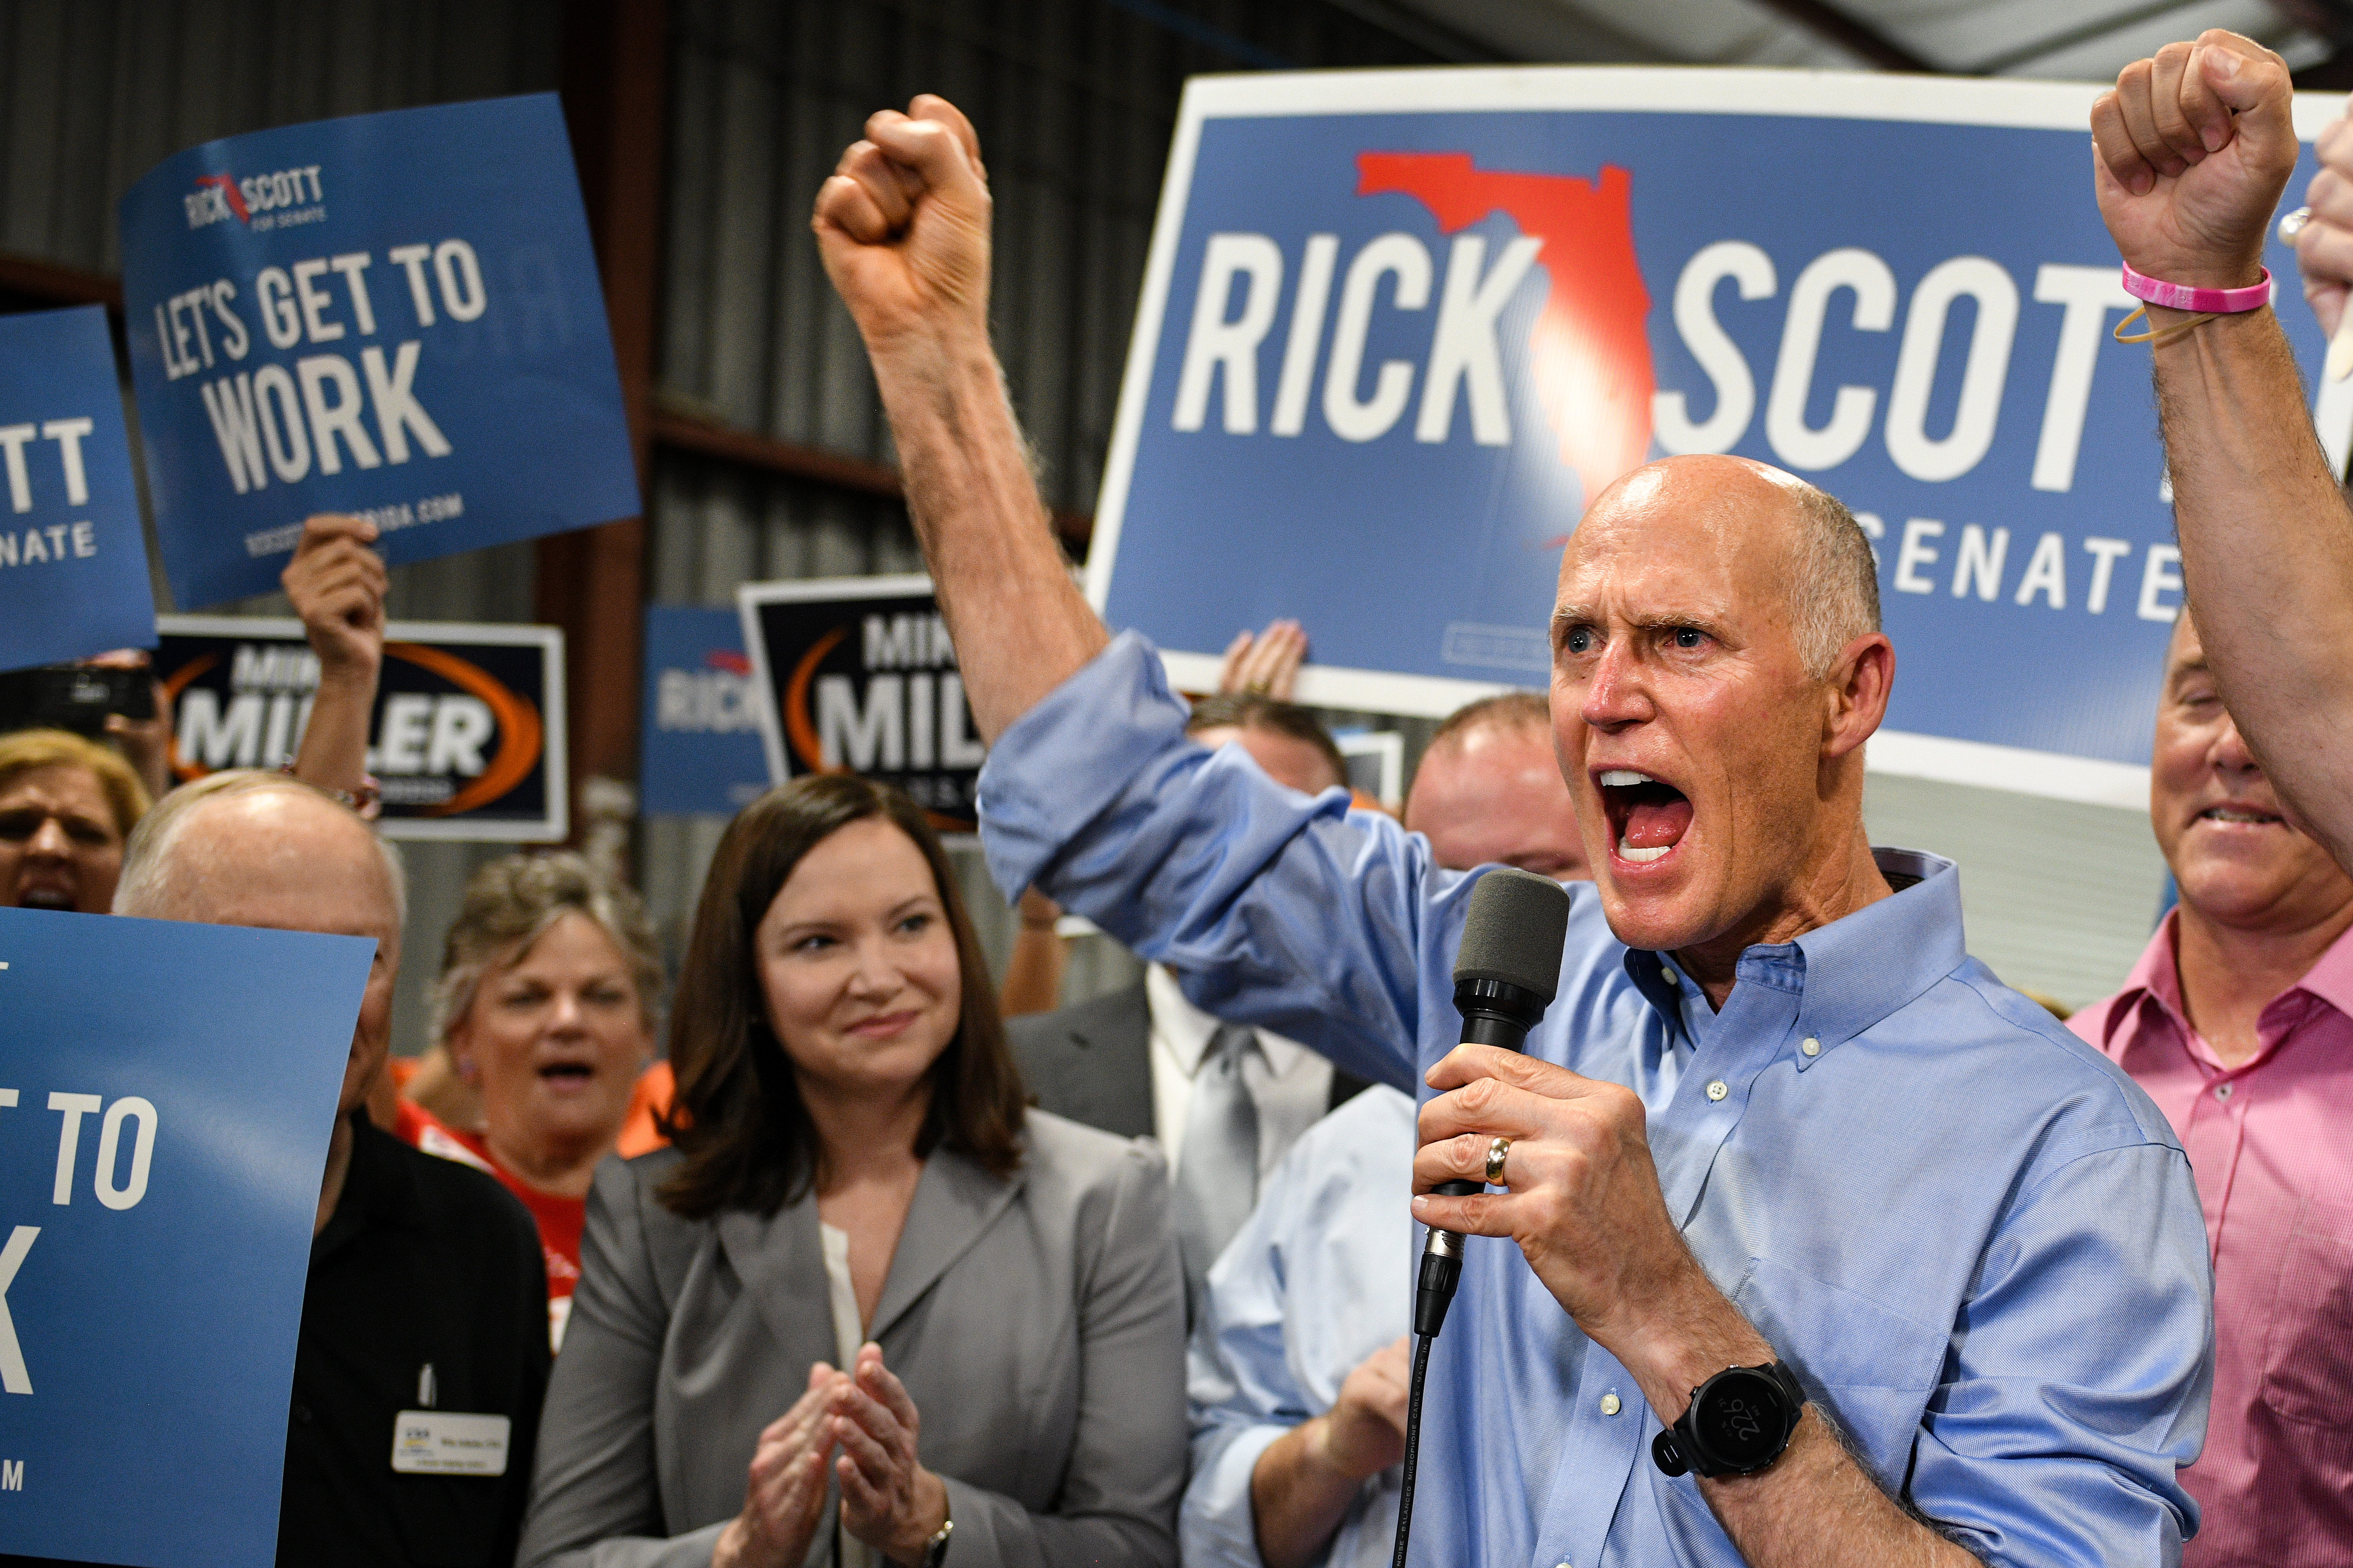 Florida Republican Senate candidate Rick Scott attends a Get Out the Vote Rally at Skyline Attractions on November 2, 2018 in Orlando, Florida. (Jeff J Mitchell/Getty Images)